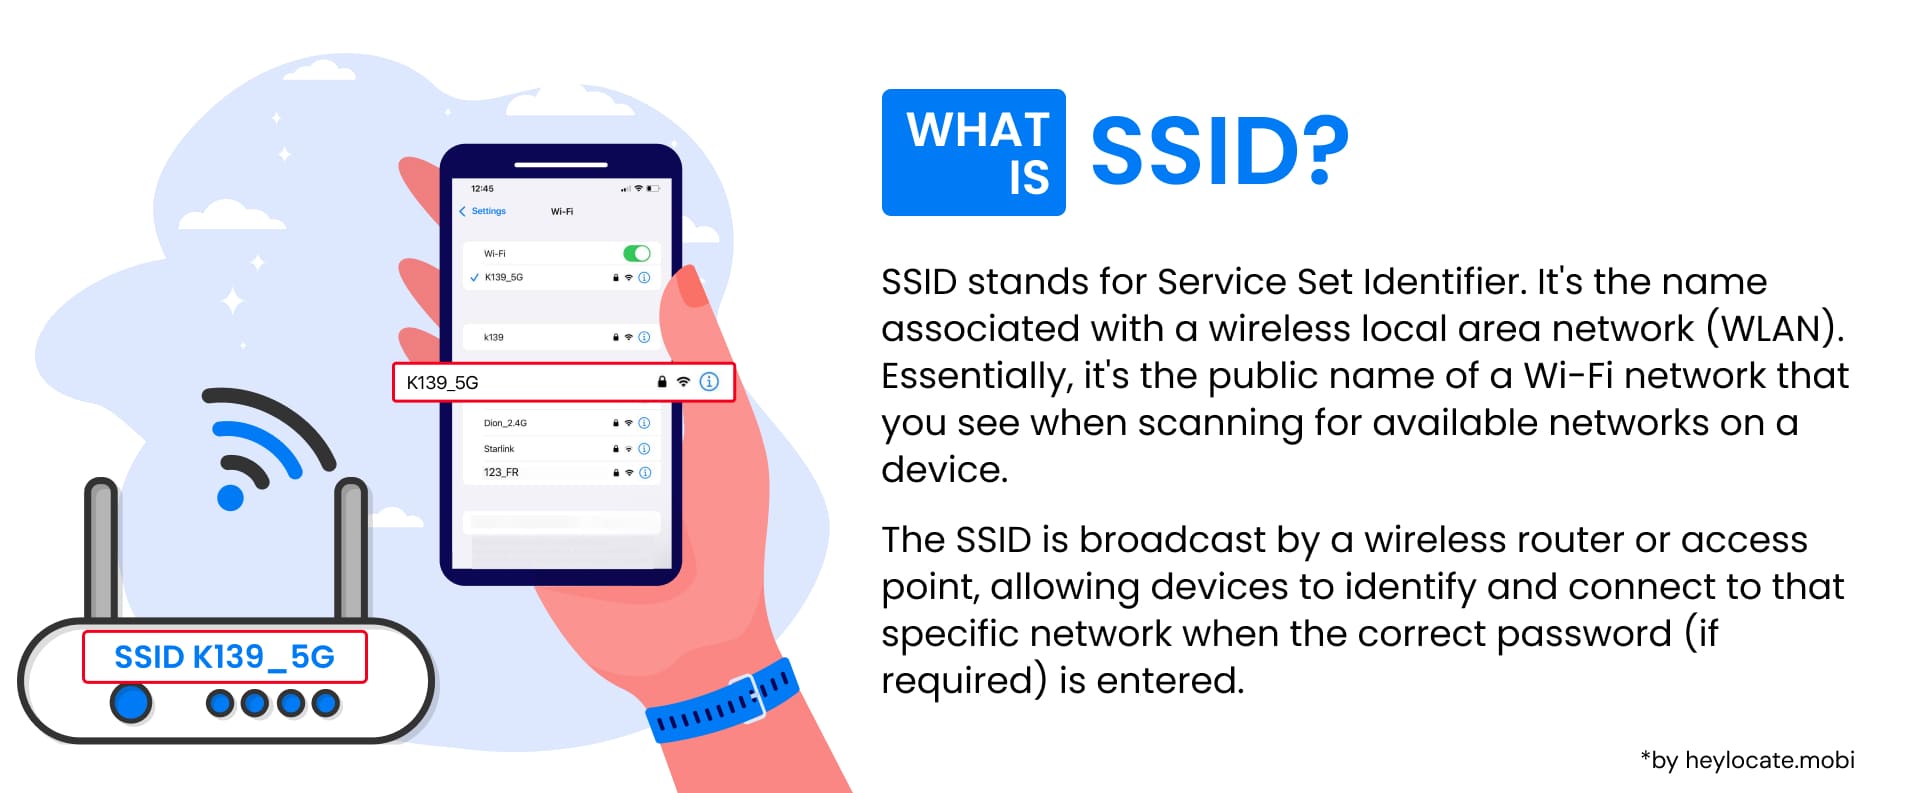 Graphic showing a mobile device connecting to a Wi-Fi network with SSID and definition of what SSID is